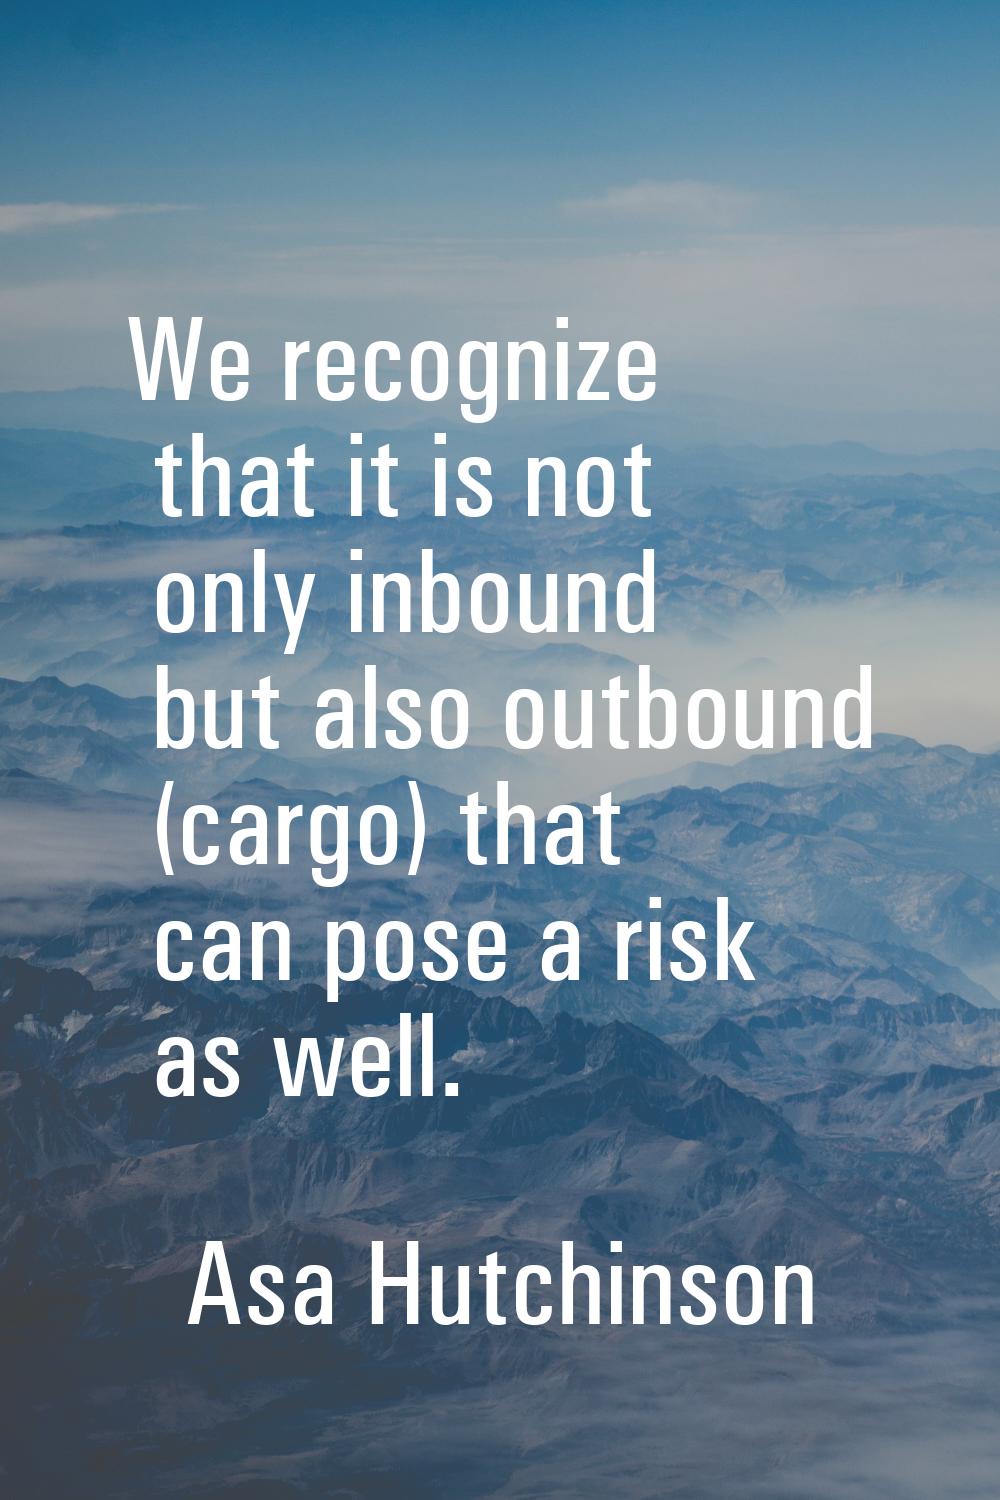 We recognize that it is not only inbound but also outbound (cargo) that can pose a risk as well.